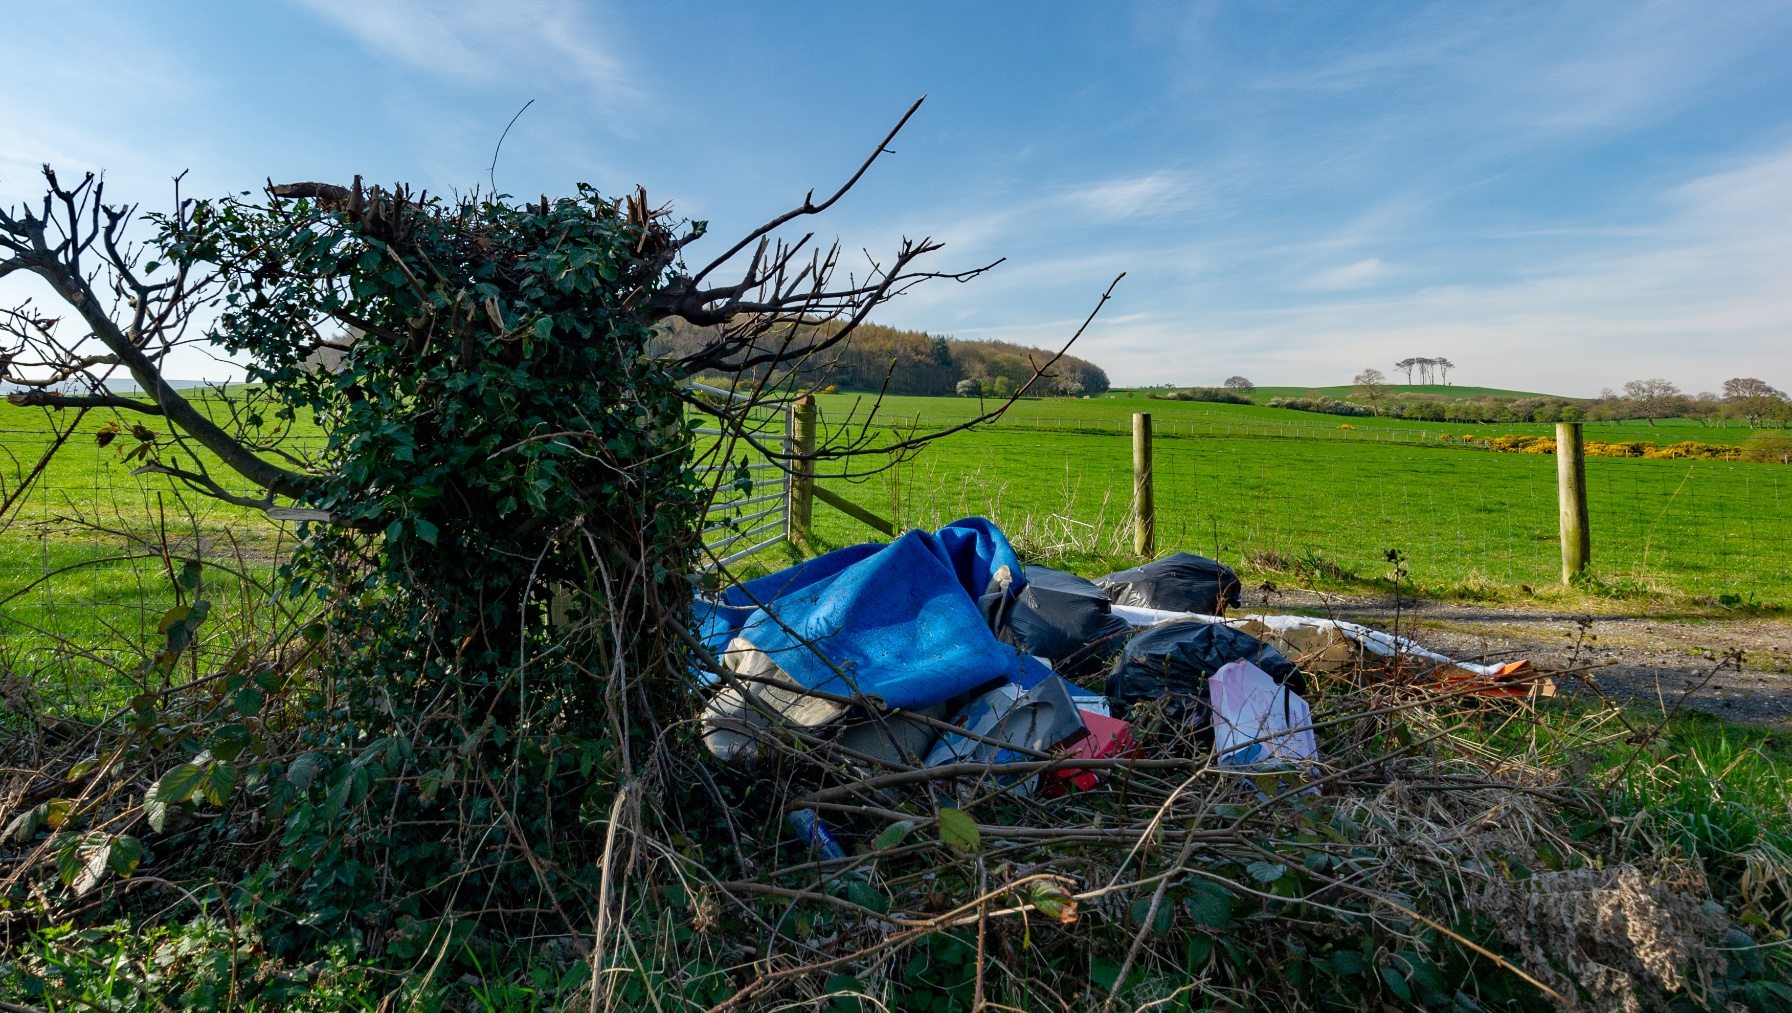 Surrey Environment Partnership calls for tougher legal action on fly-tippers